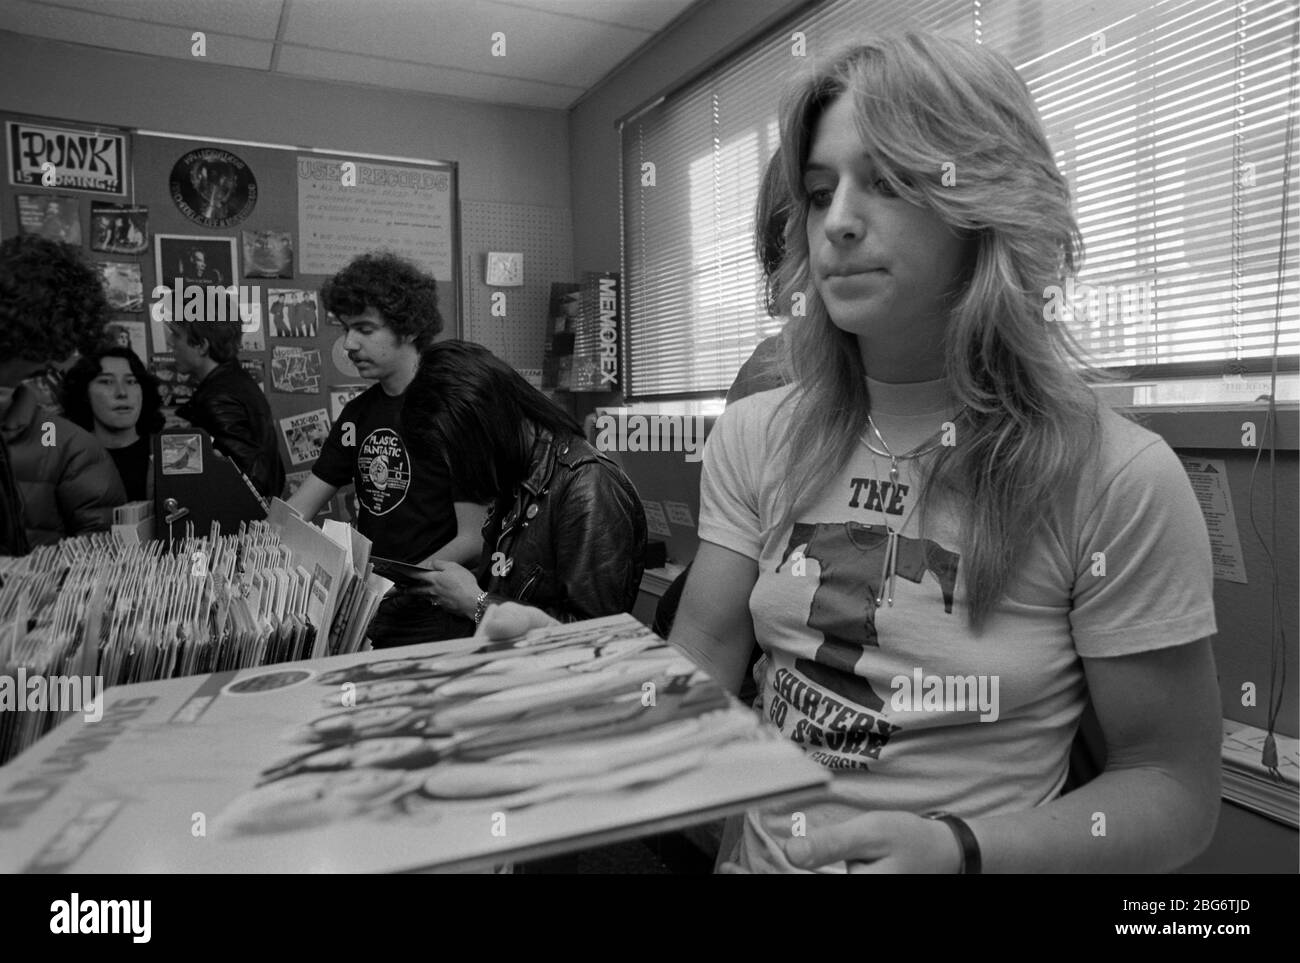 Sandy West Of The Runaways Making A Personal Appearance At A Record Store In Philadelphia To Promote Their New Album Live In Japan March 1978 Credit Scott Weiner Mediapunch Stock Photo Alamy